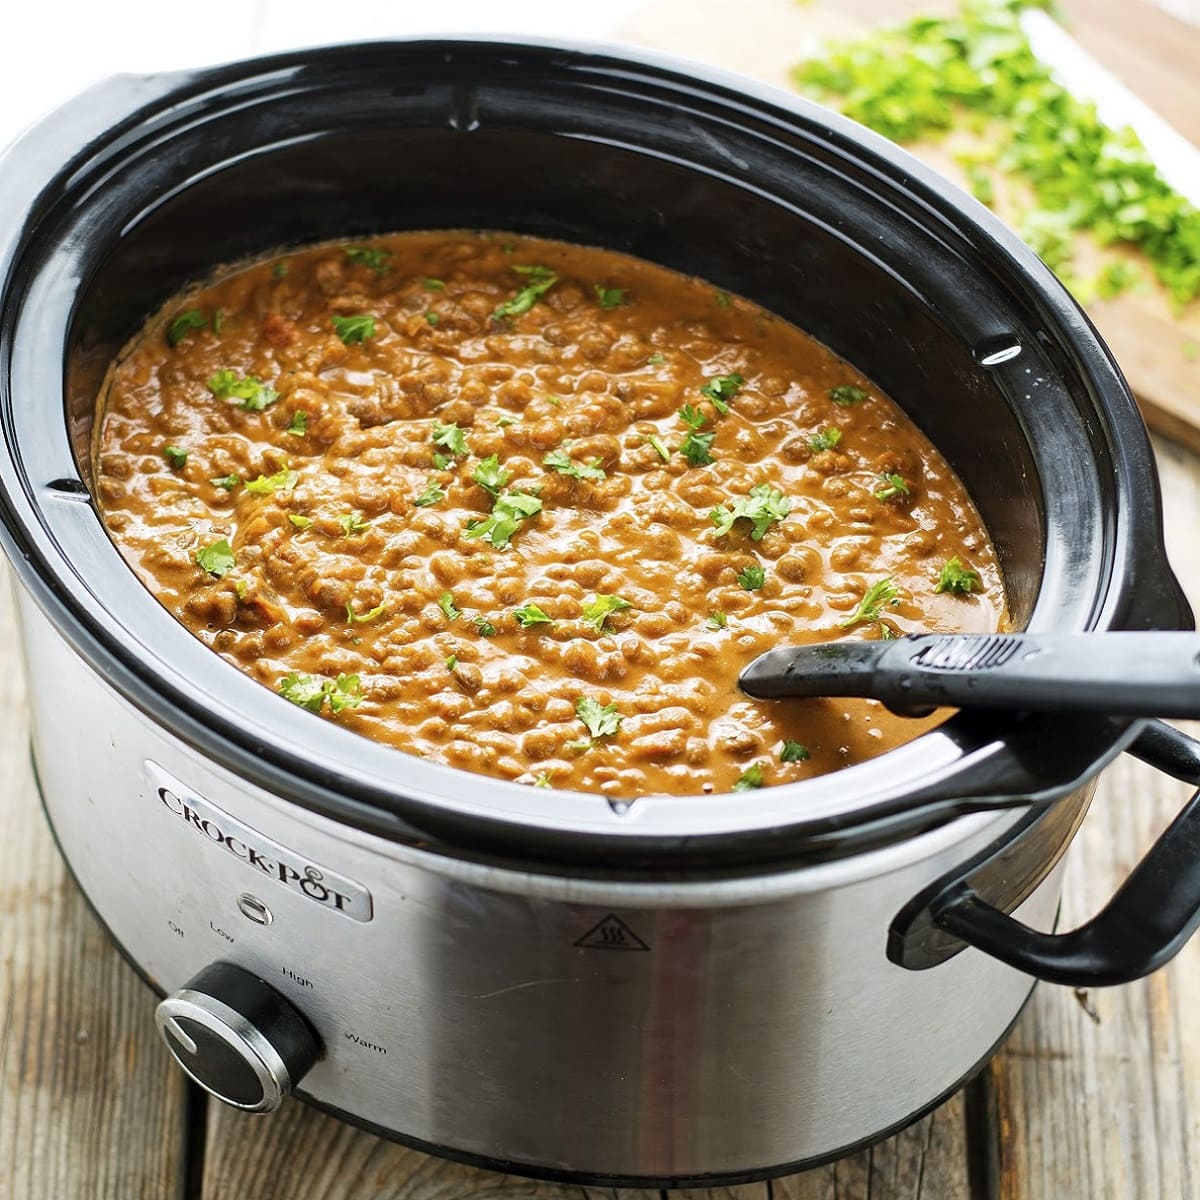 How Long To Cook Lentils In Slow Cooker